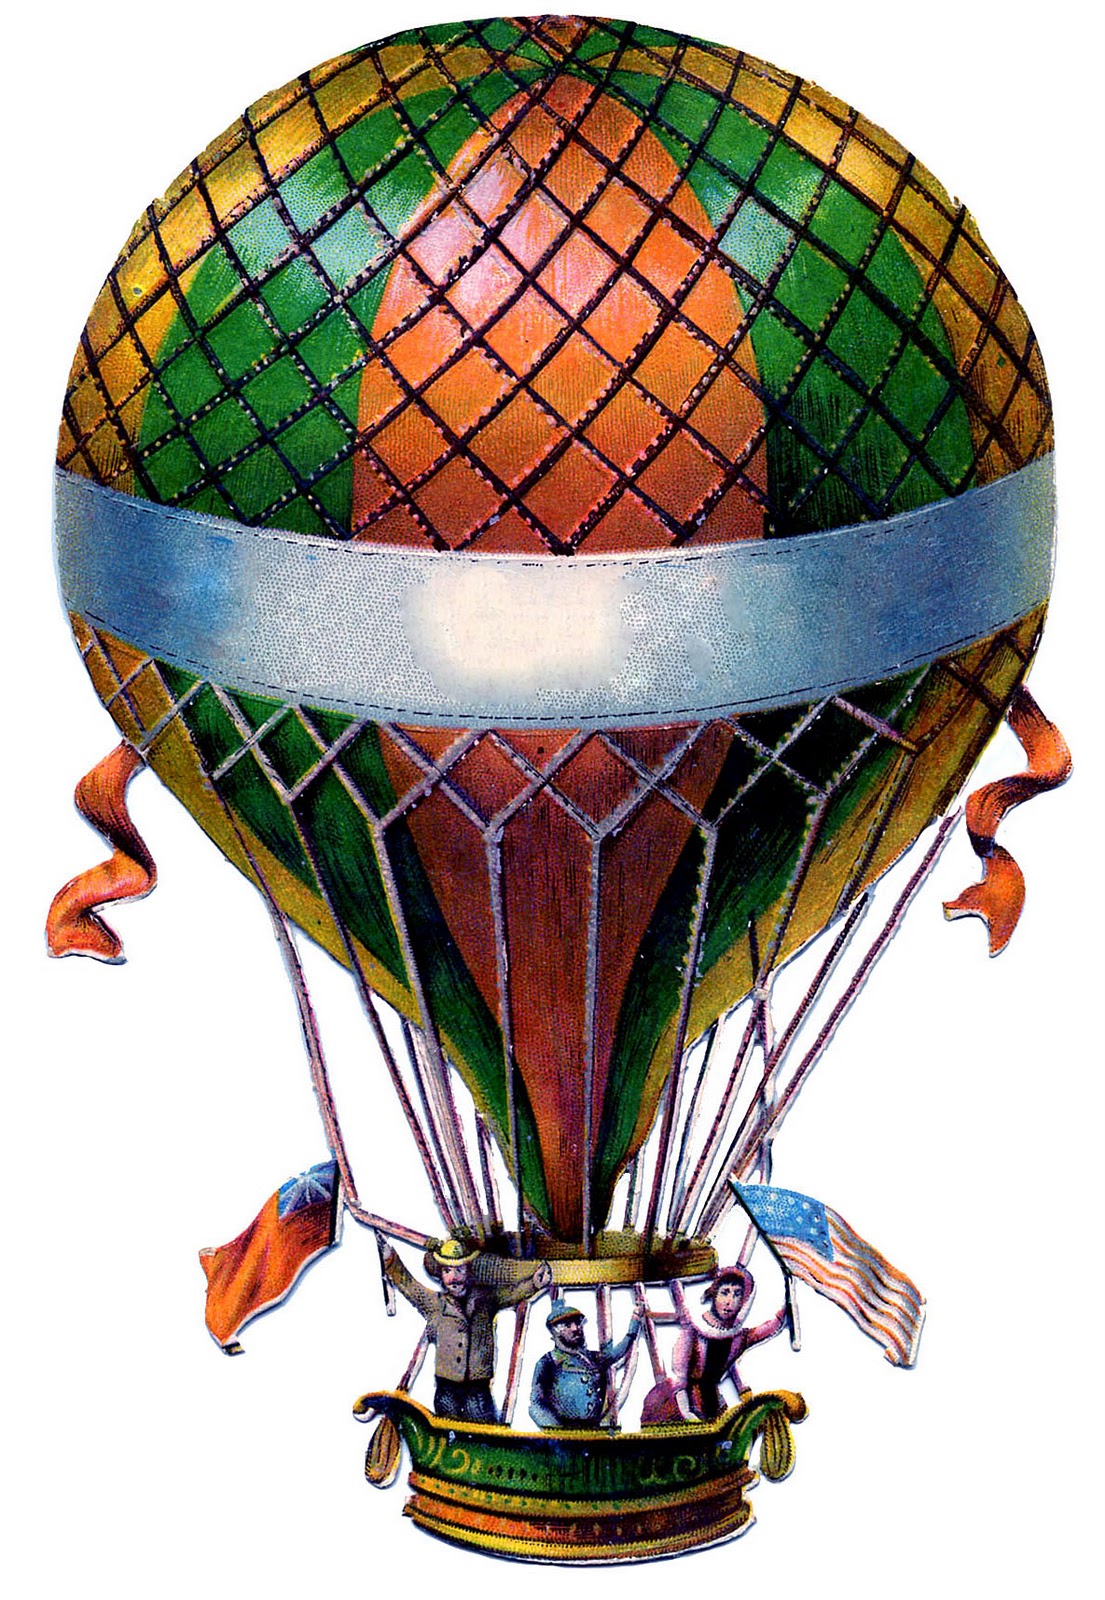 Antique Graphic - Hot Air Balloon - Steampunk - The Graphics Fairy